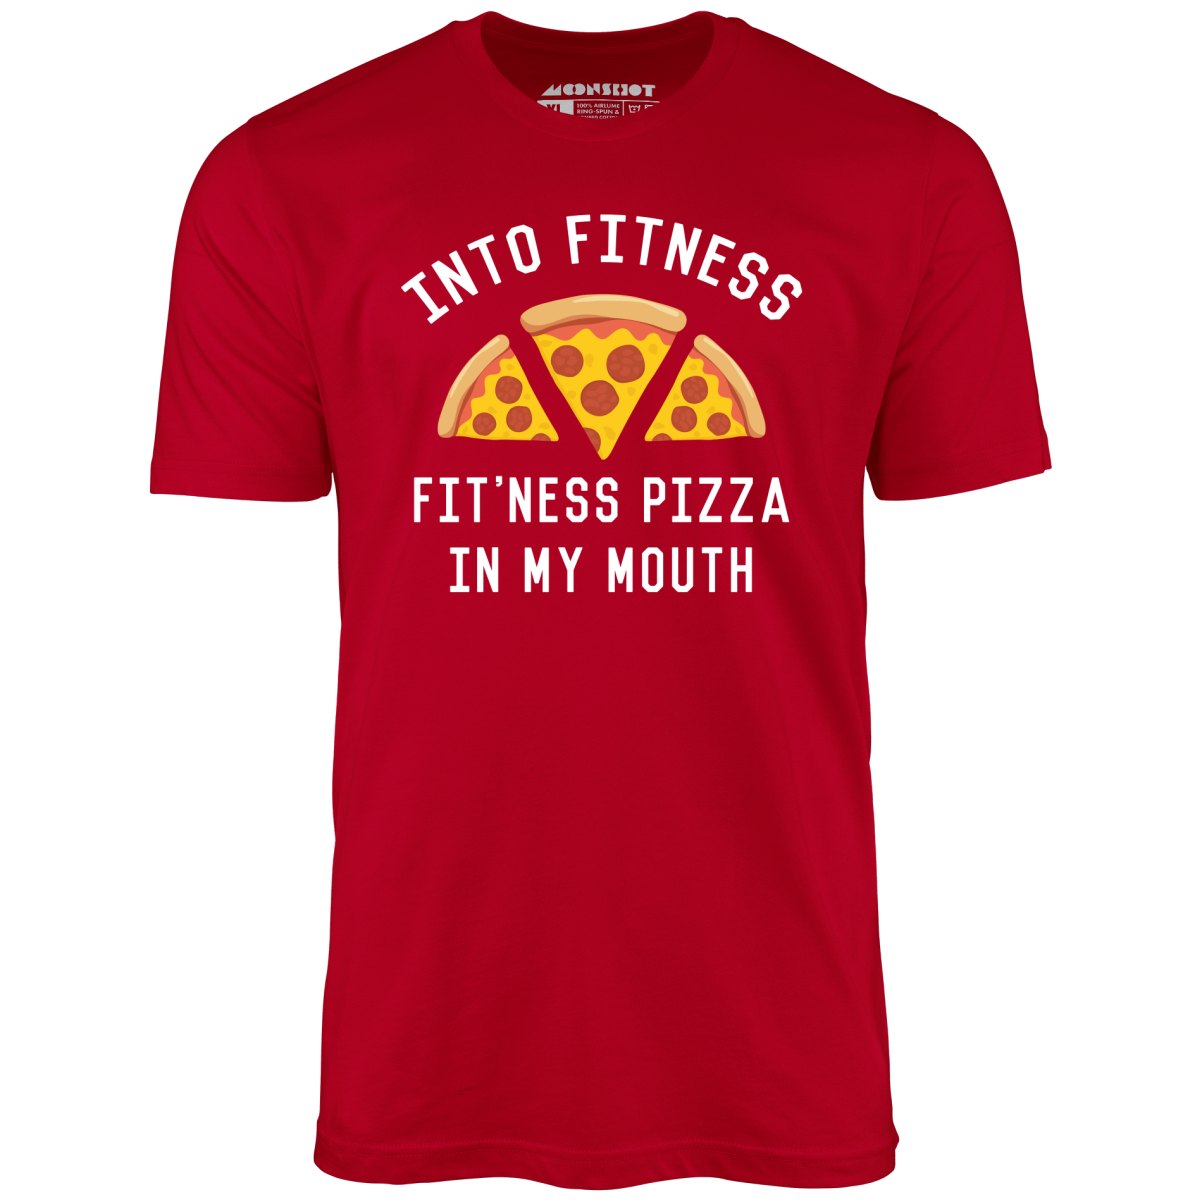 Into Fitness, Fitness Pizza in My Mouth - Unisex T-Shirt